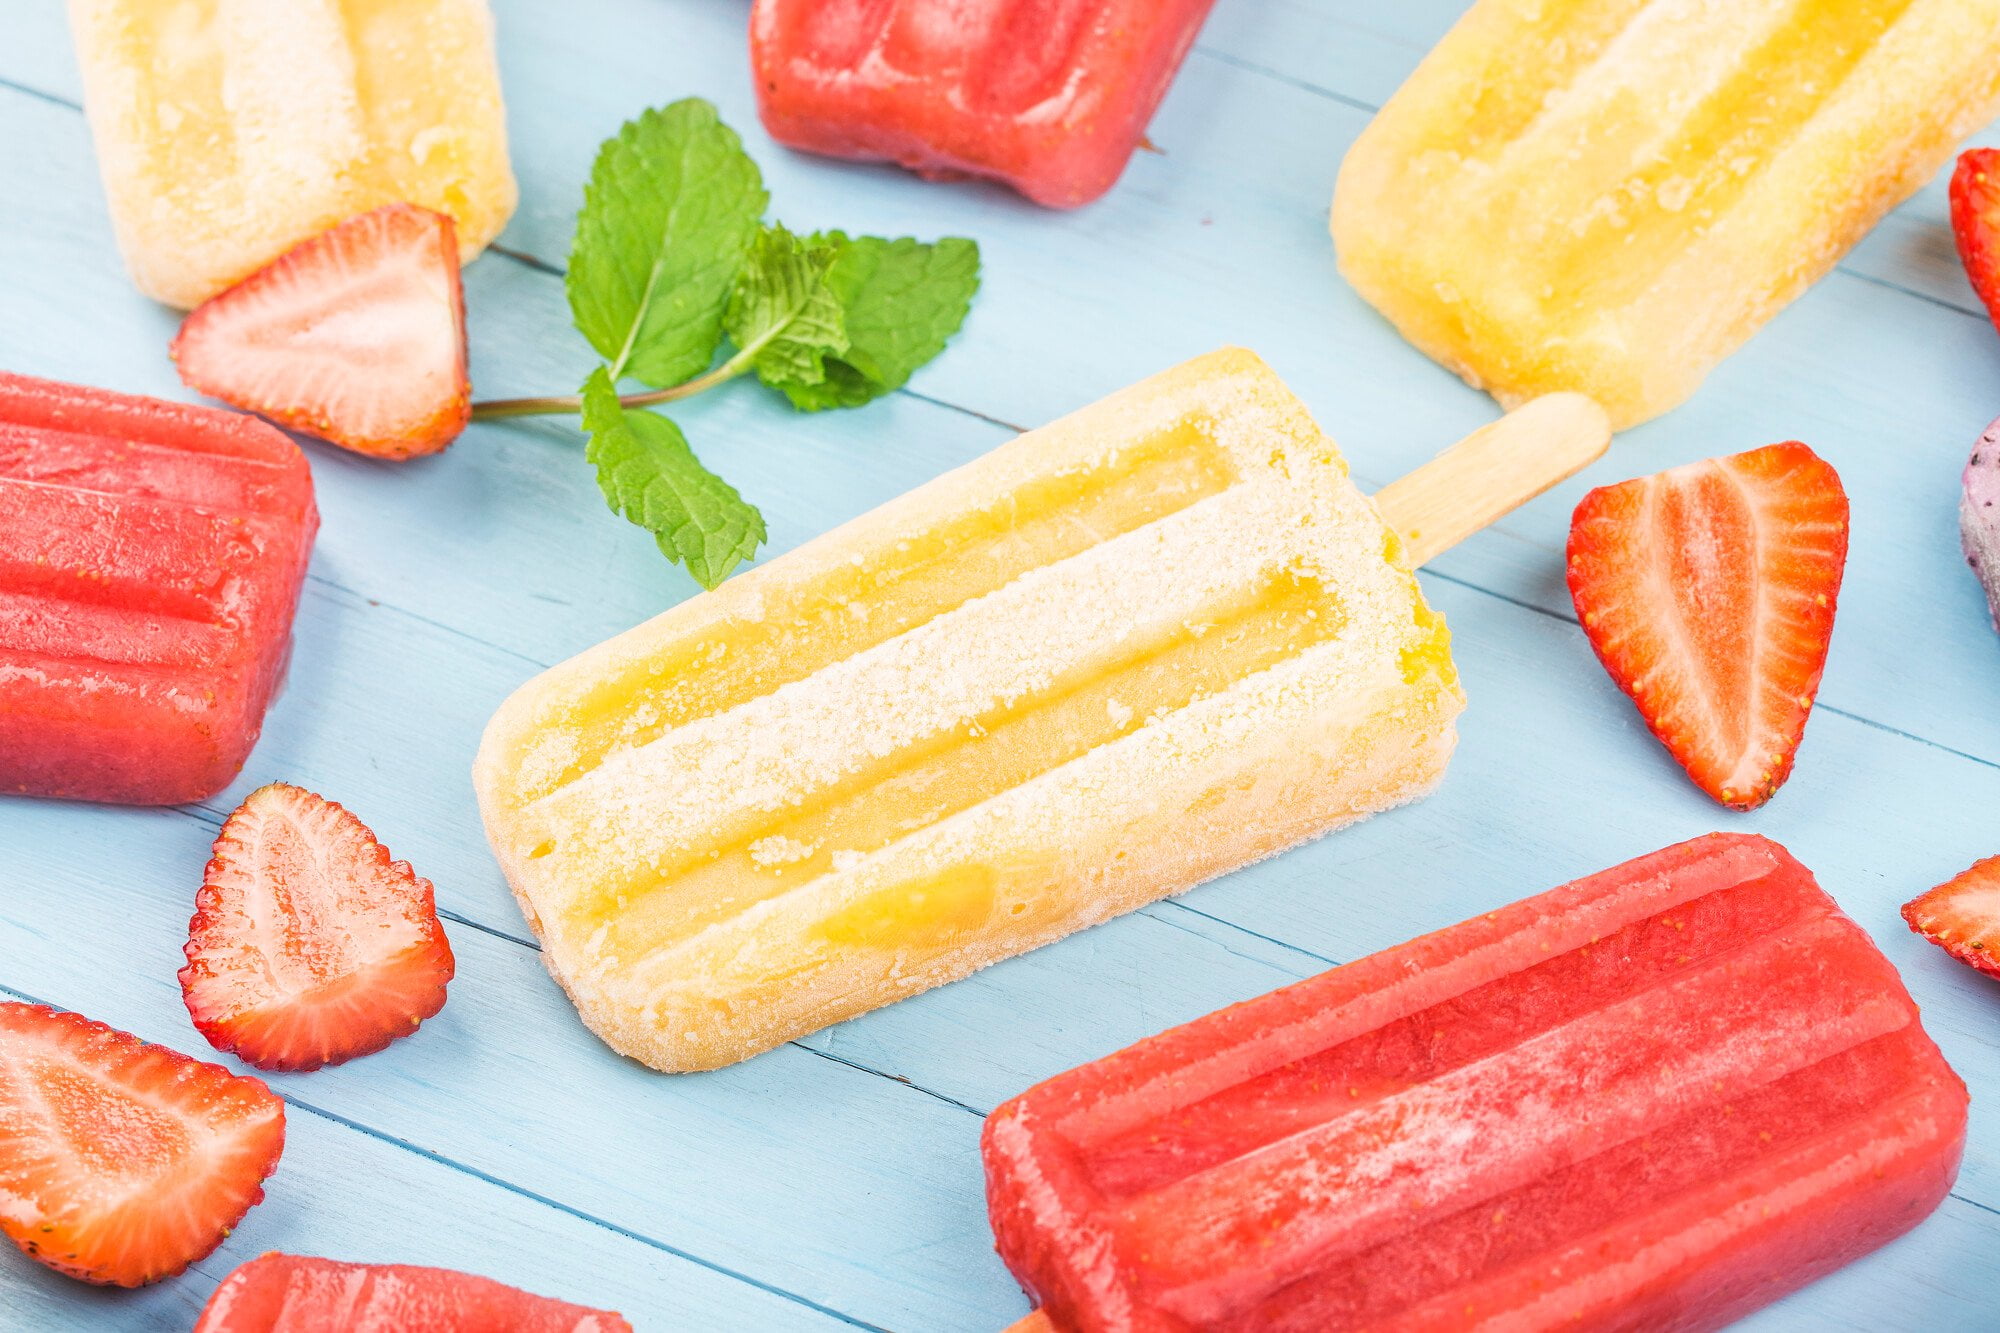 DIY popsicle recipes and fruit